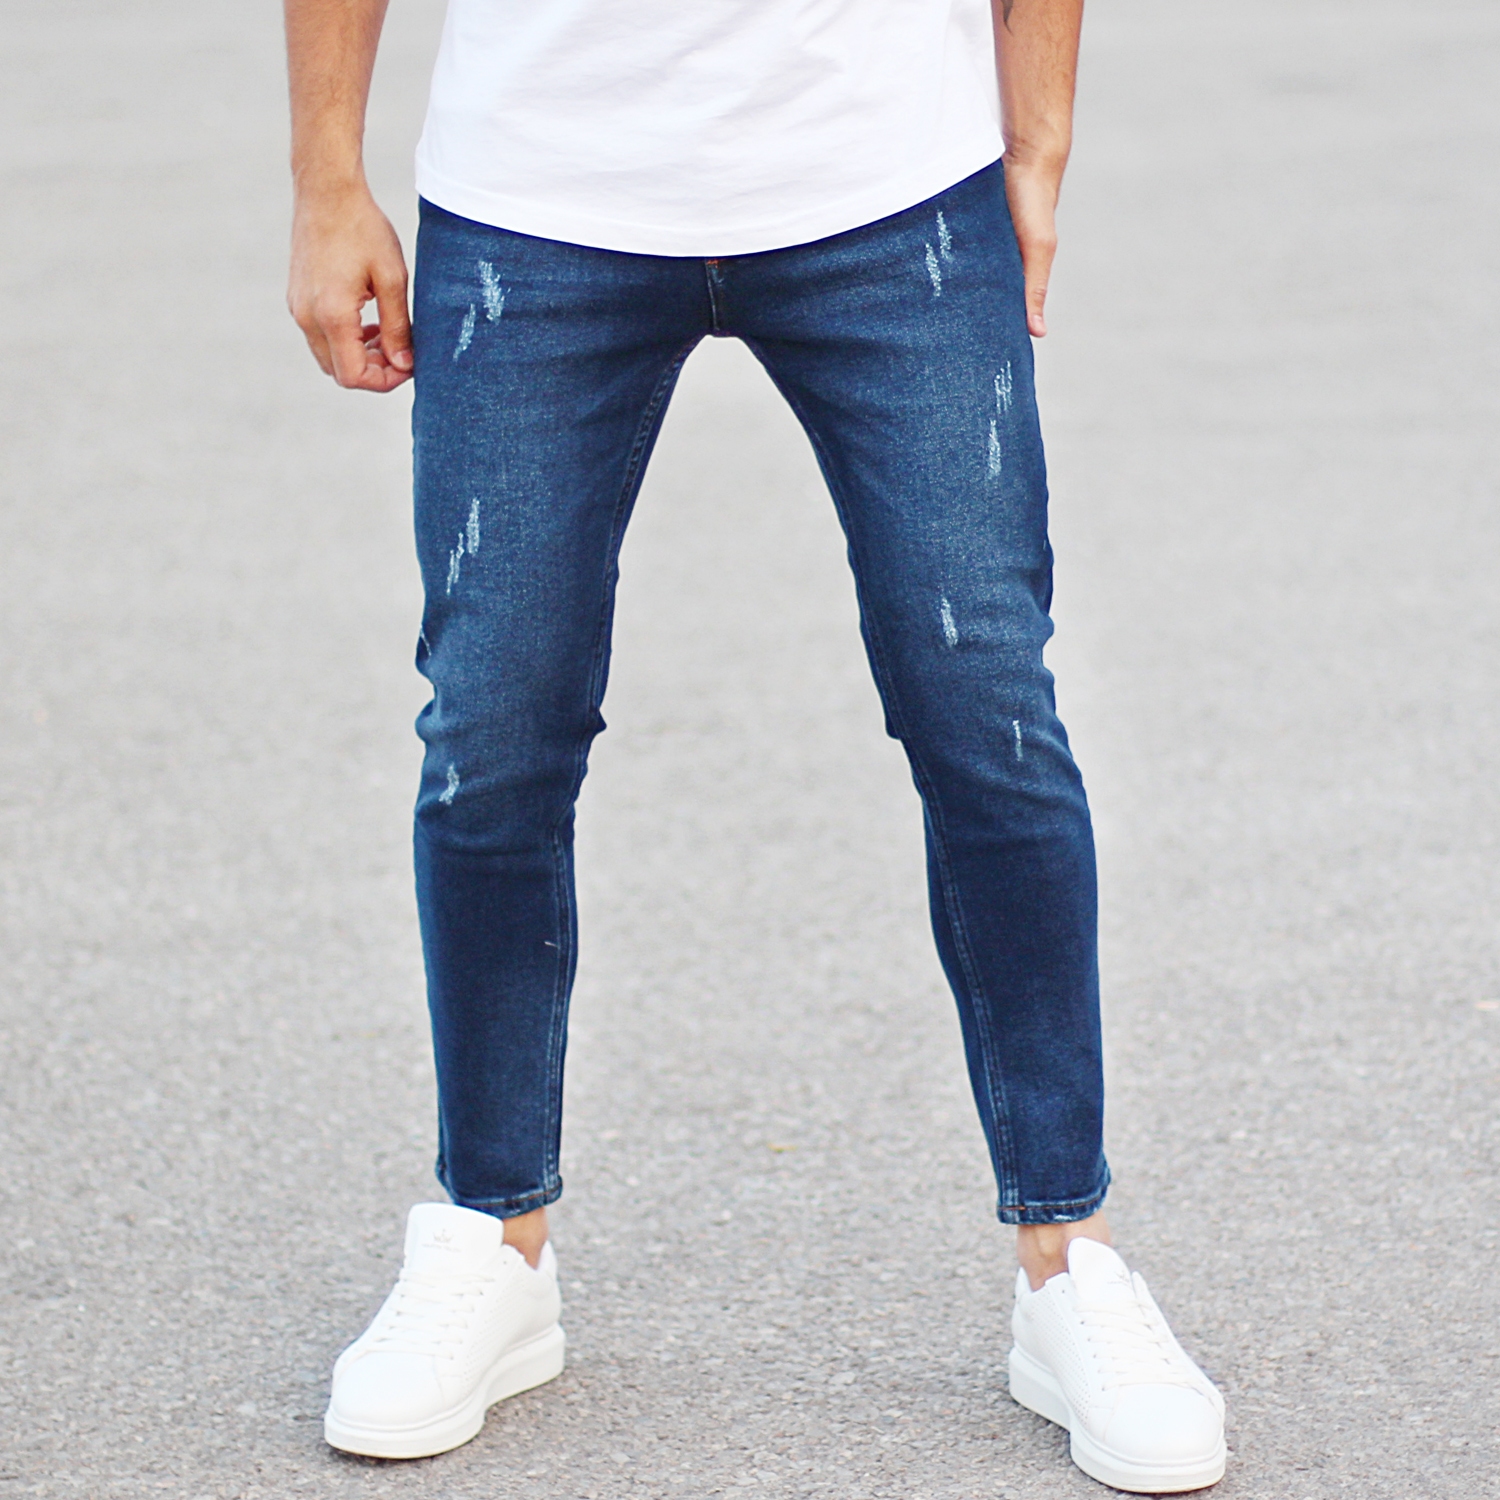 dark blue jeans outfit mens